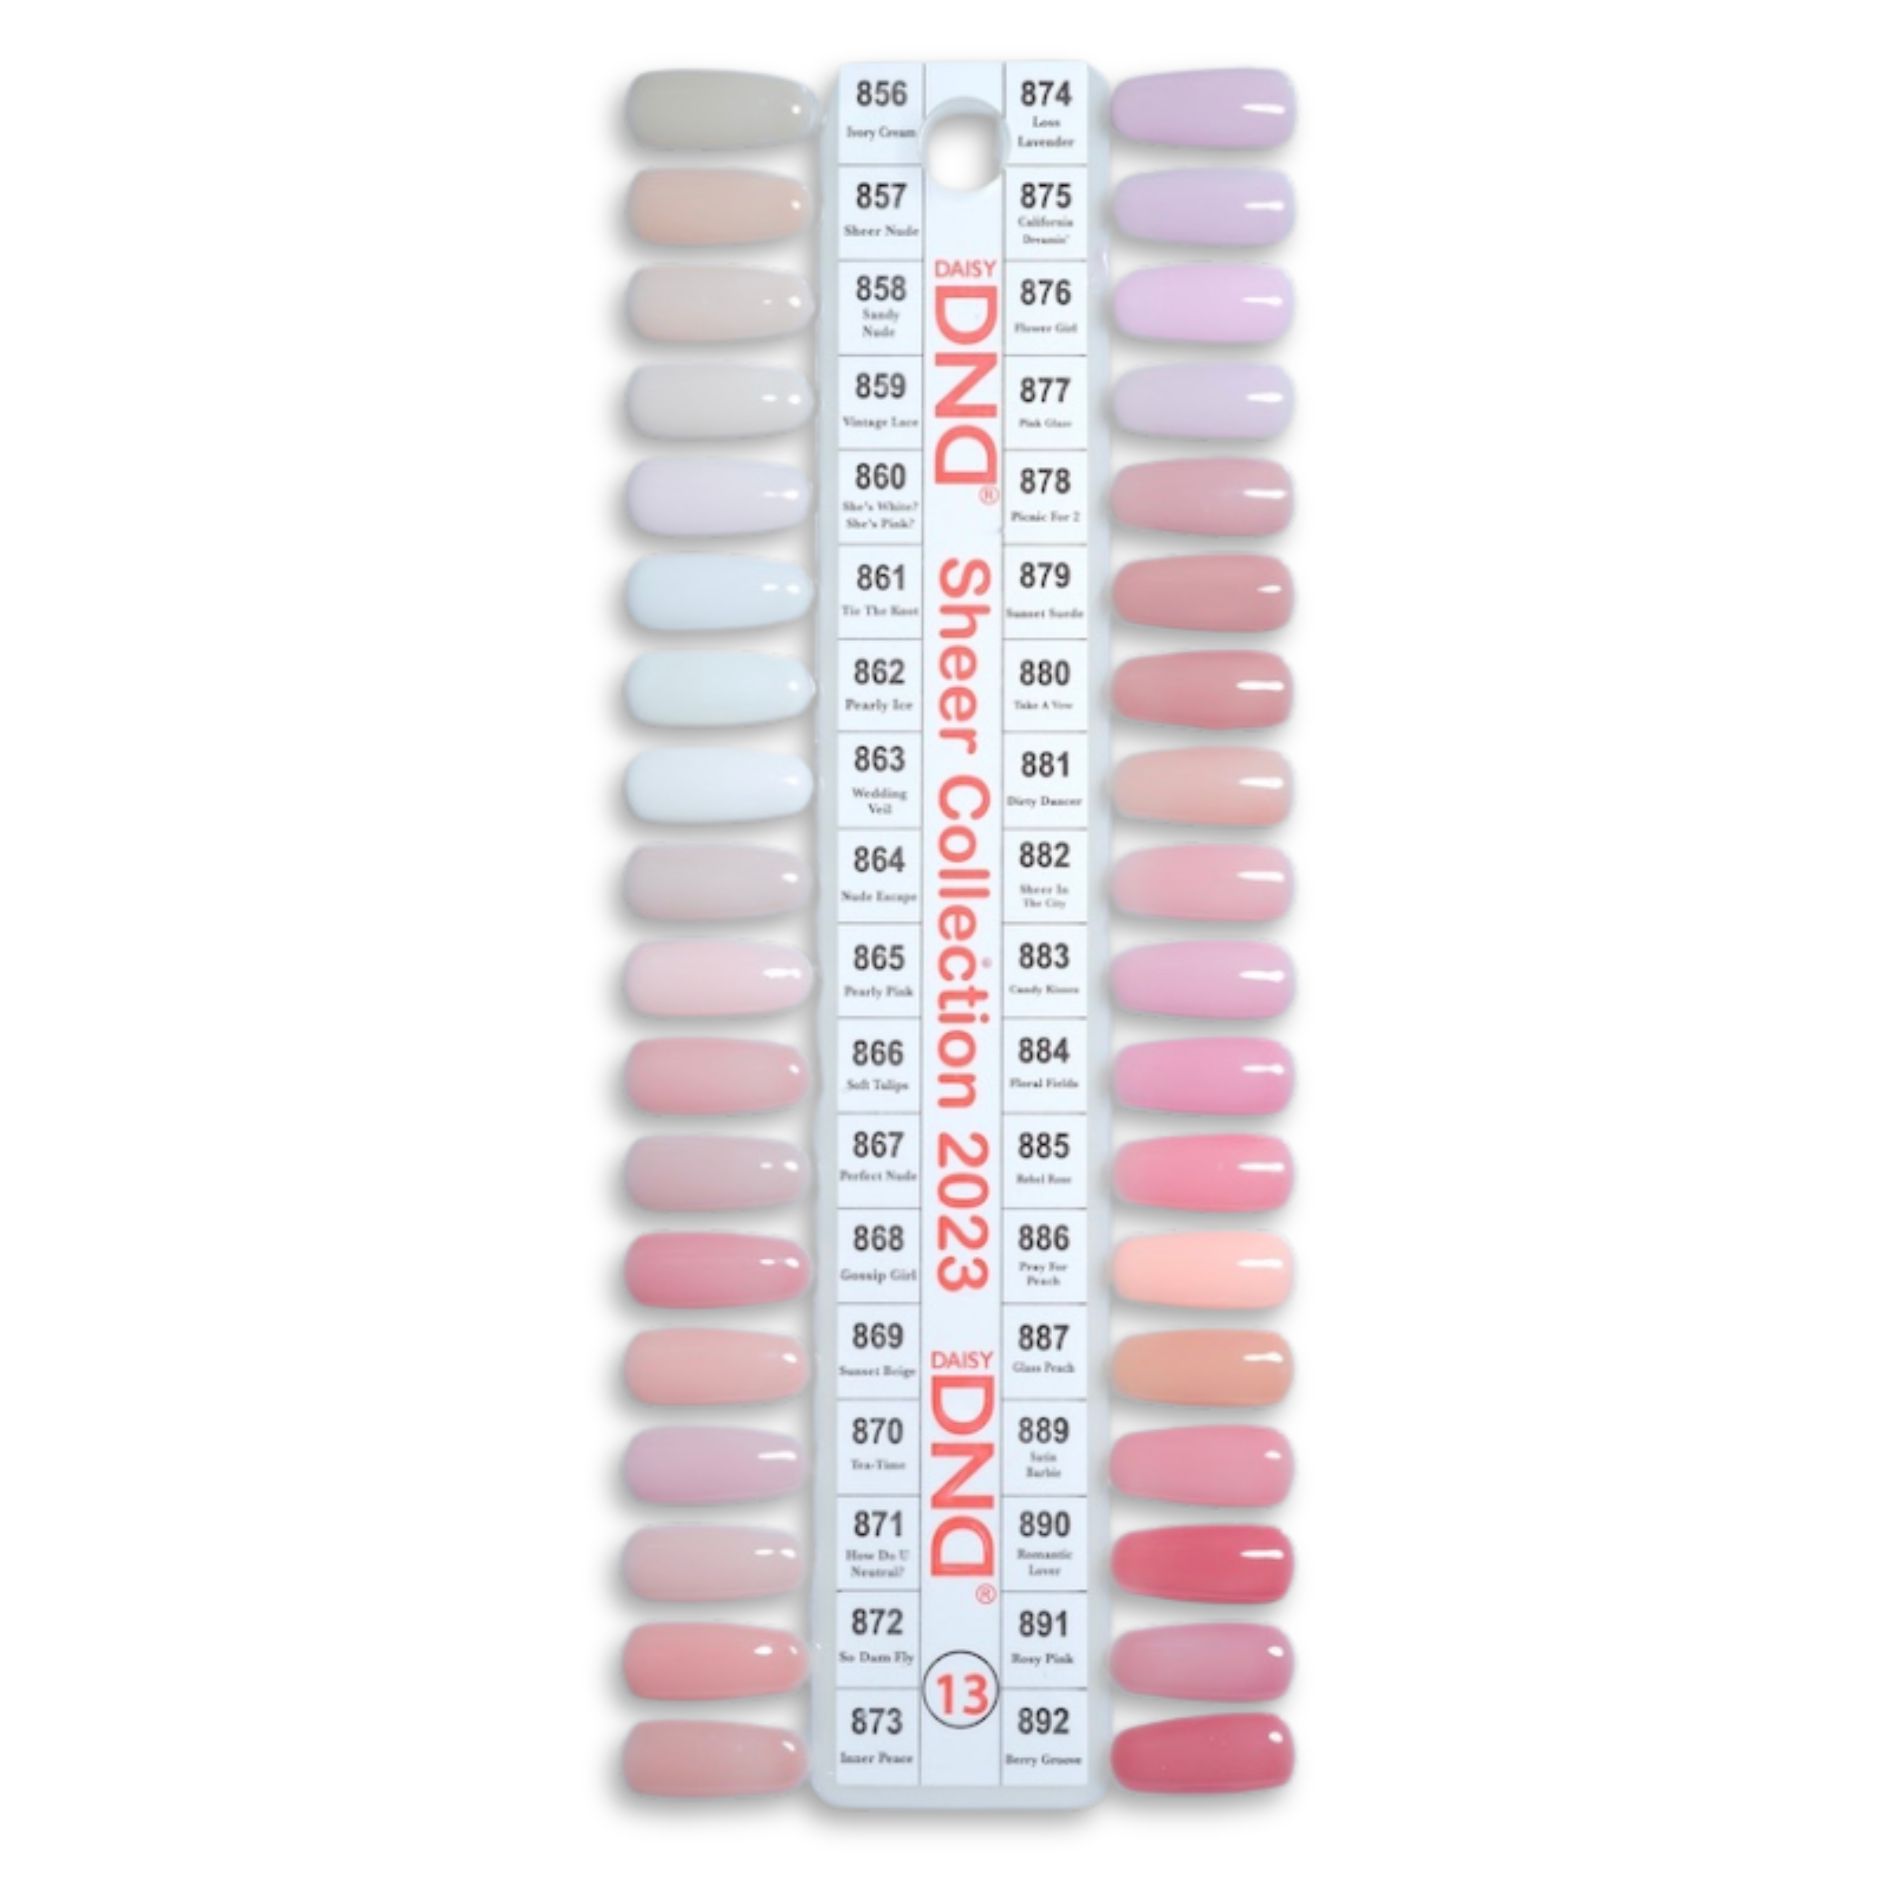 Buy Noverlife 126 Colors Nail Display Chart: Nail Color Display Card, 126 Colors  Nail Gel Polish Display Chart with Tips, Professional Nail Color Swatches  Book Nail Practice Design Board for DIY Online